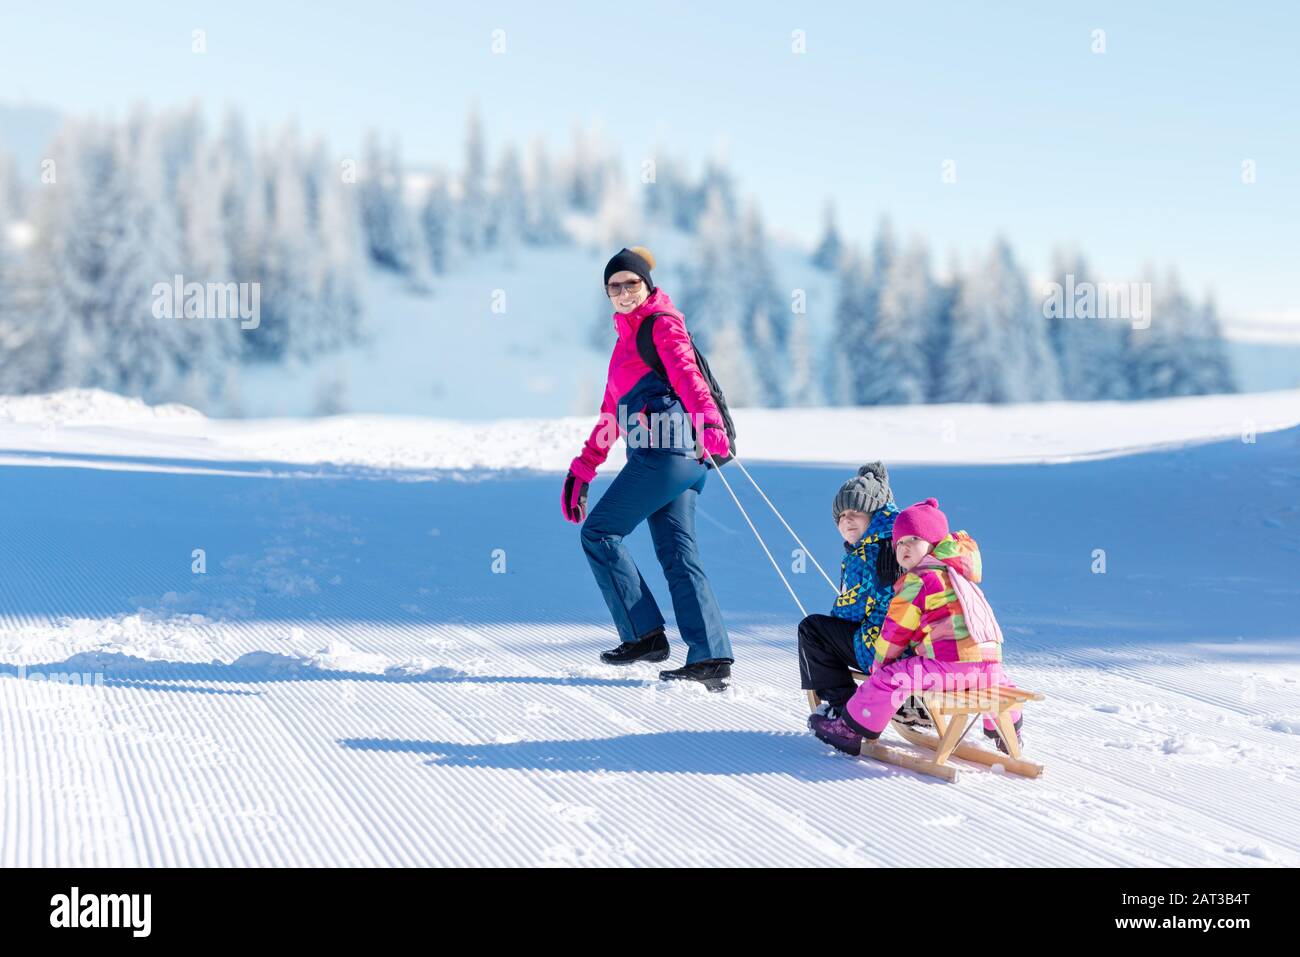 Mother dragging the sled with the boy and girl. Concept of a play on snow and winter vacation Stock Photo